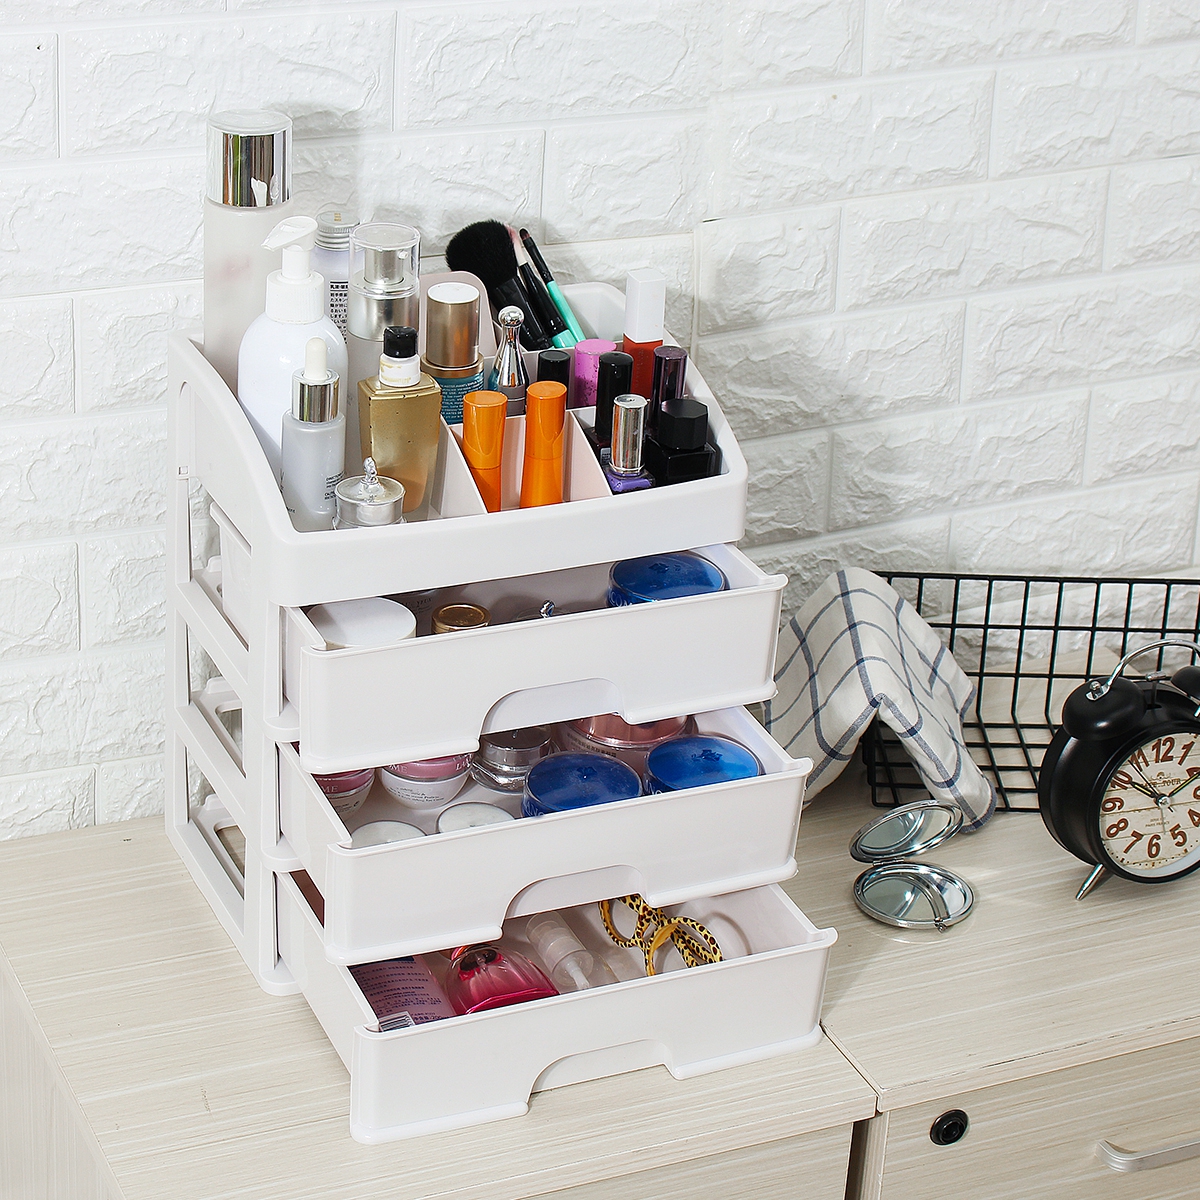 123-Layers-Desktop-Makeup-Drawer-Organizer-Clear-Cosmetic-Storage-Box-Container-Make-Up-Storage-1635536-3